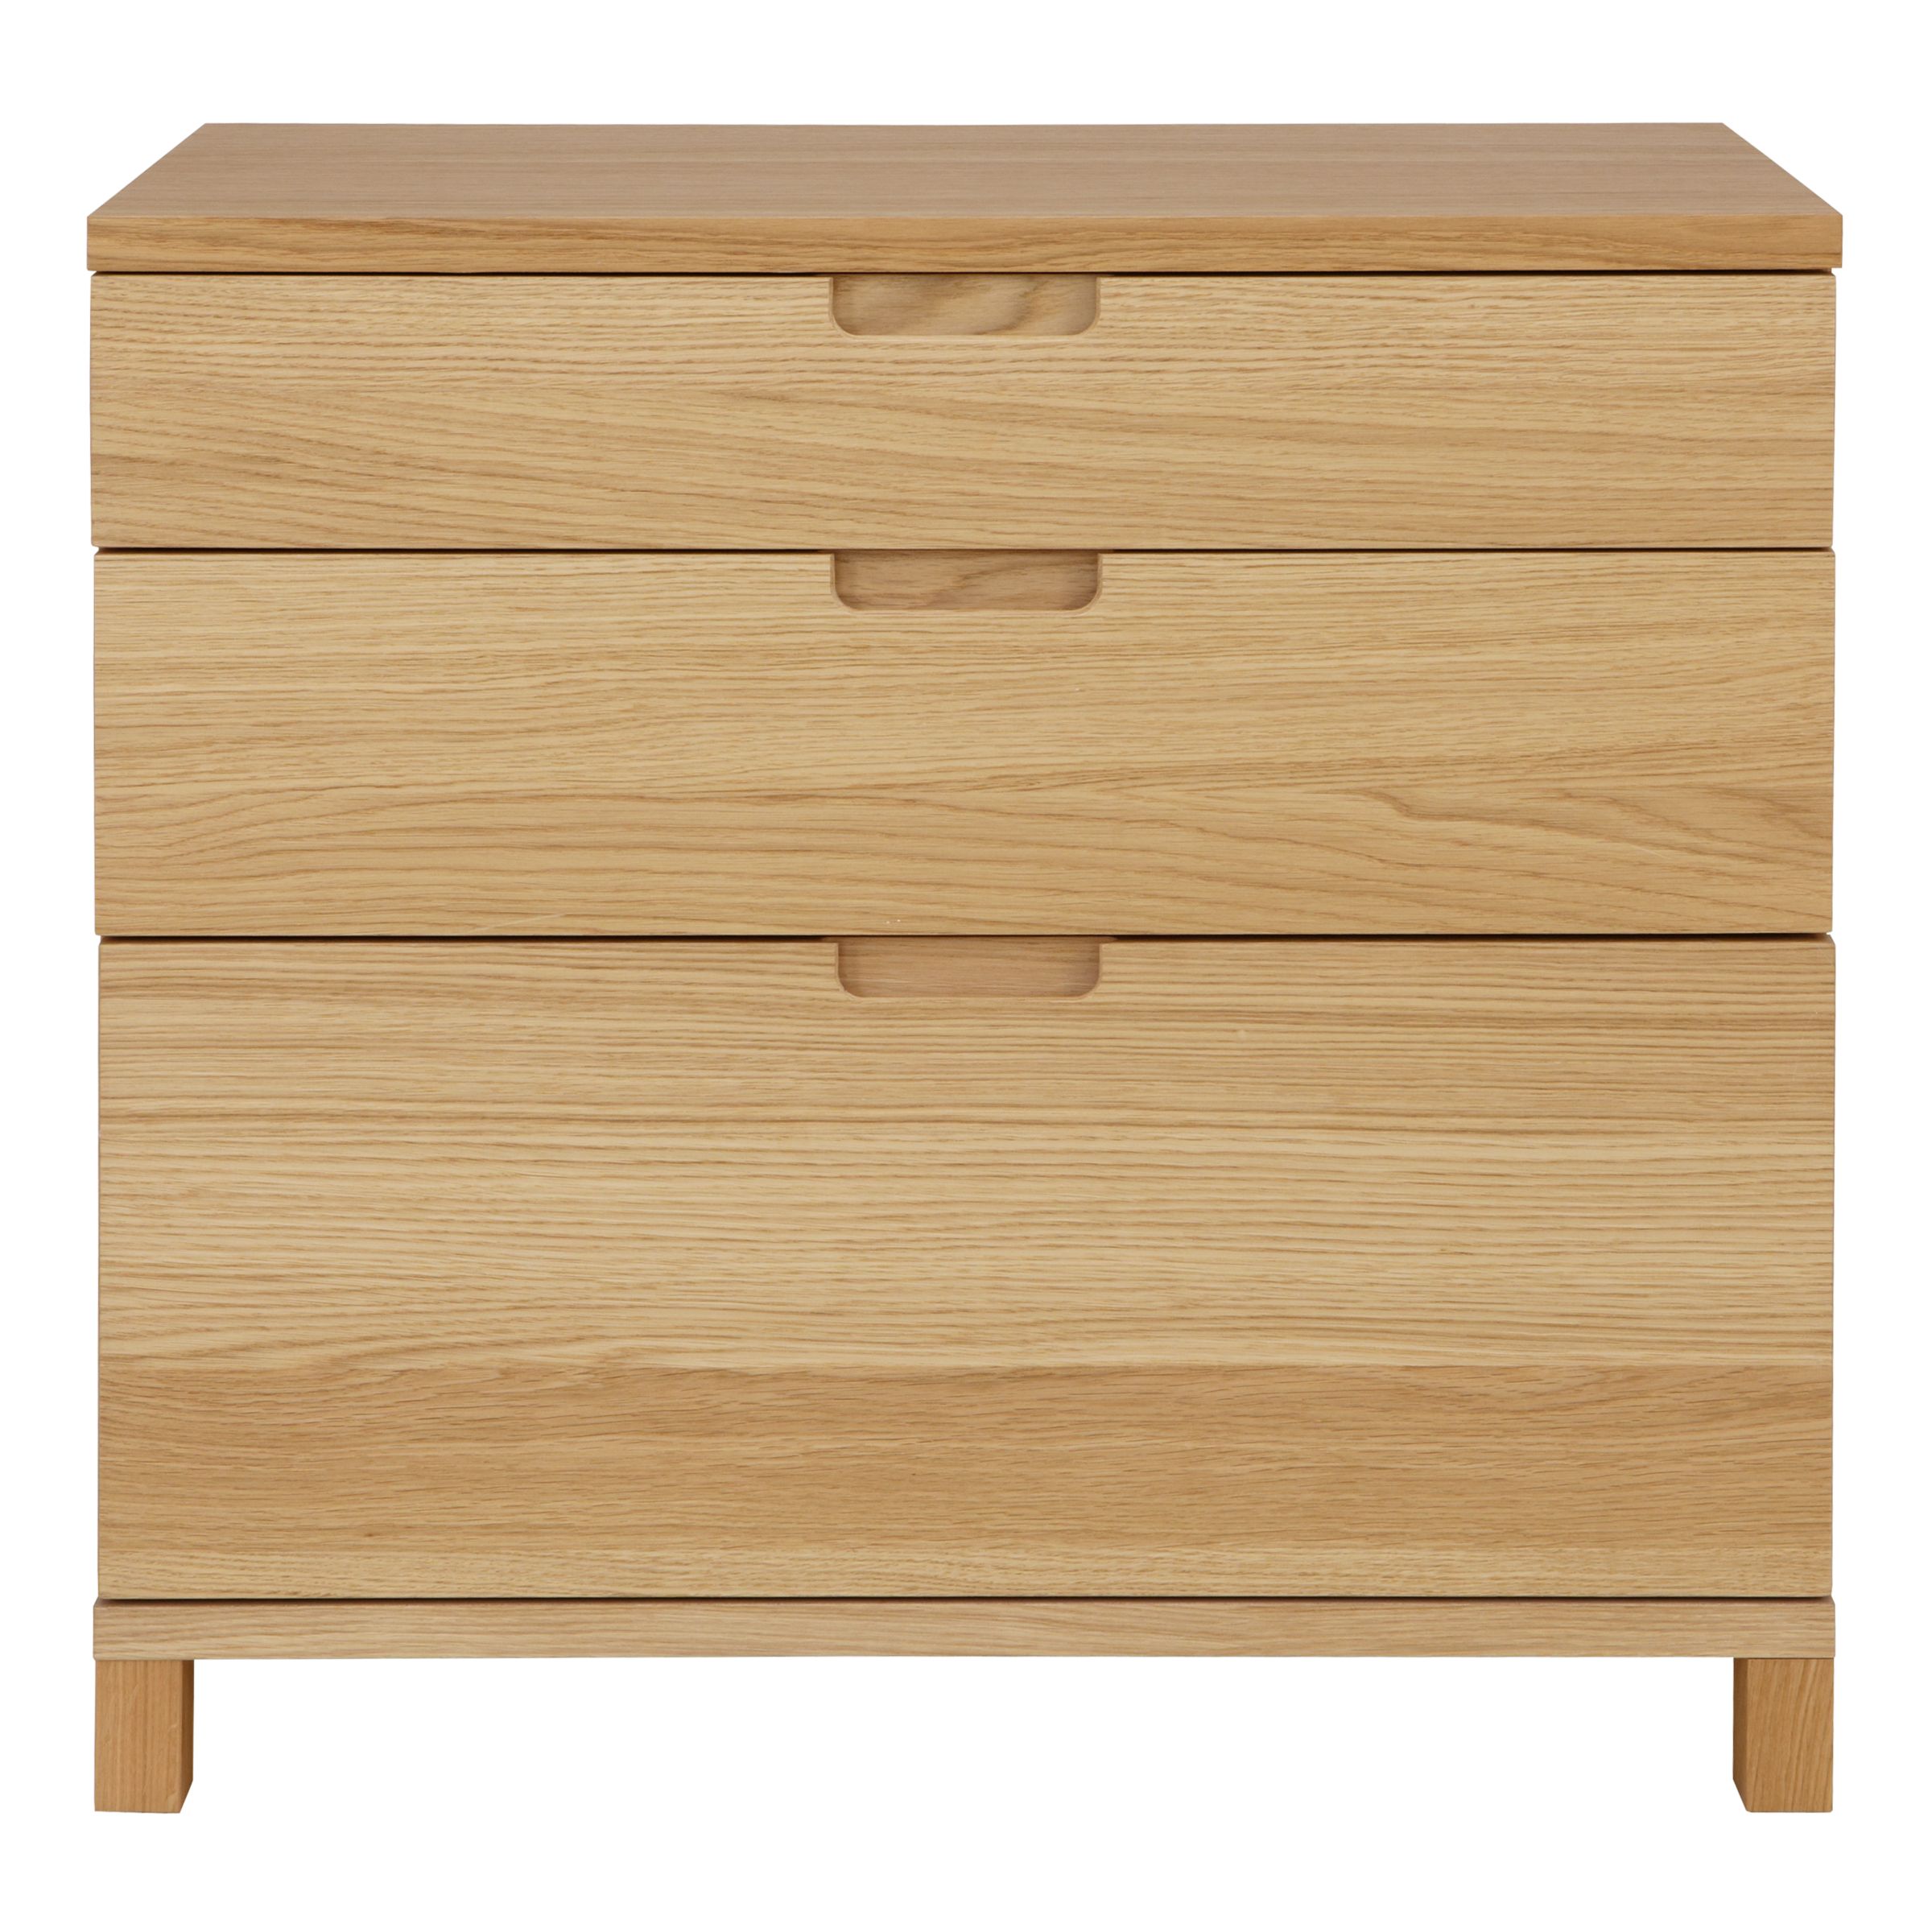 Photo of John lewis abacus 3-drawer wide filing chest fsc-certified -oan wood-